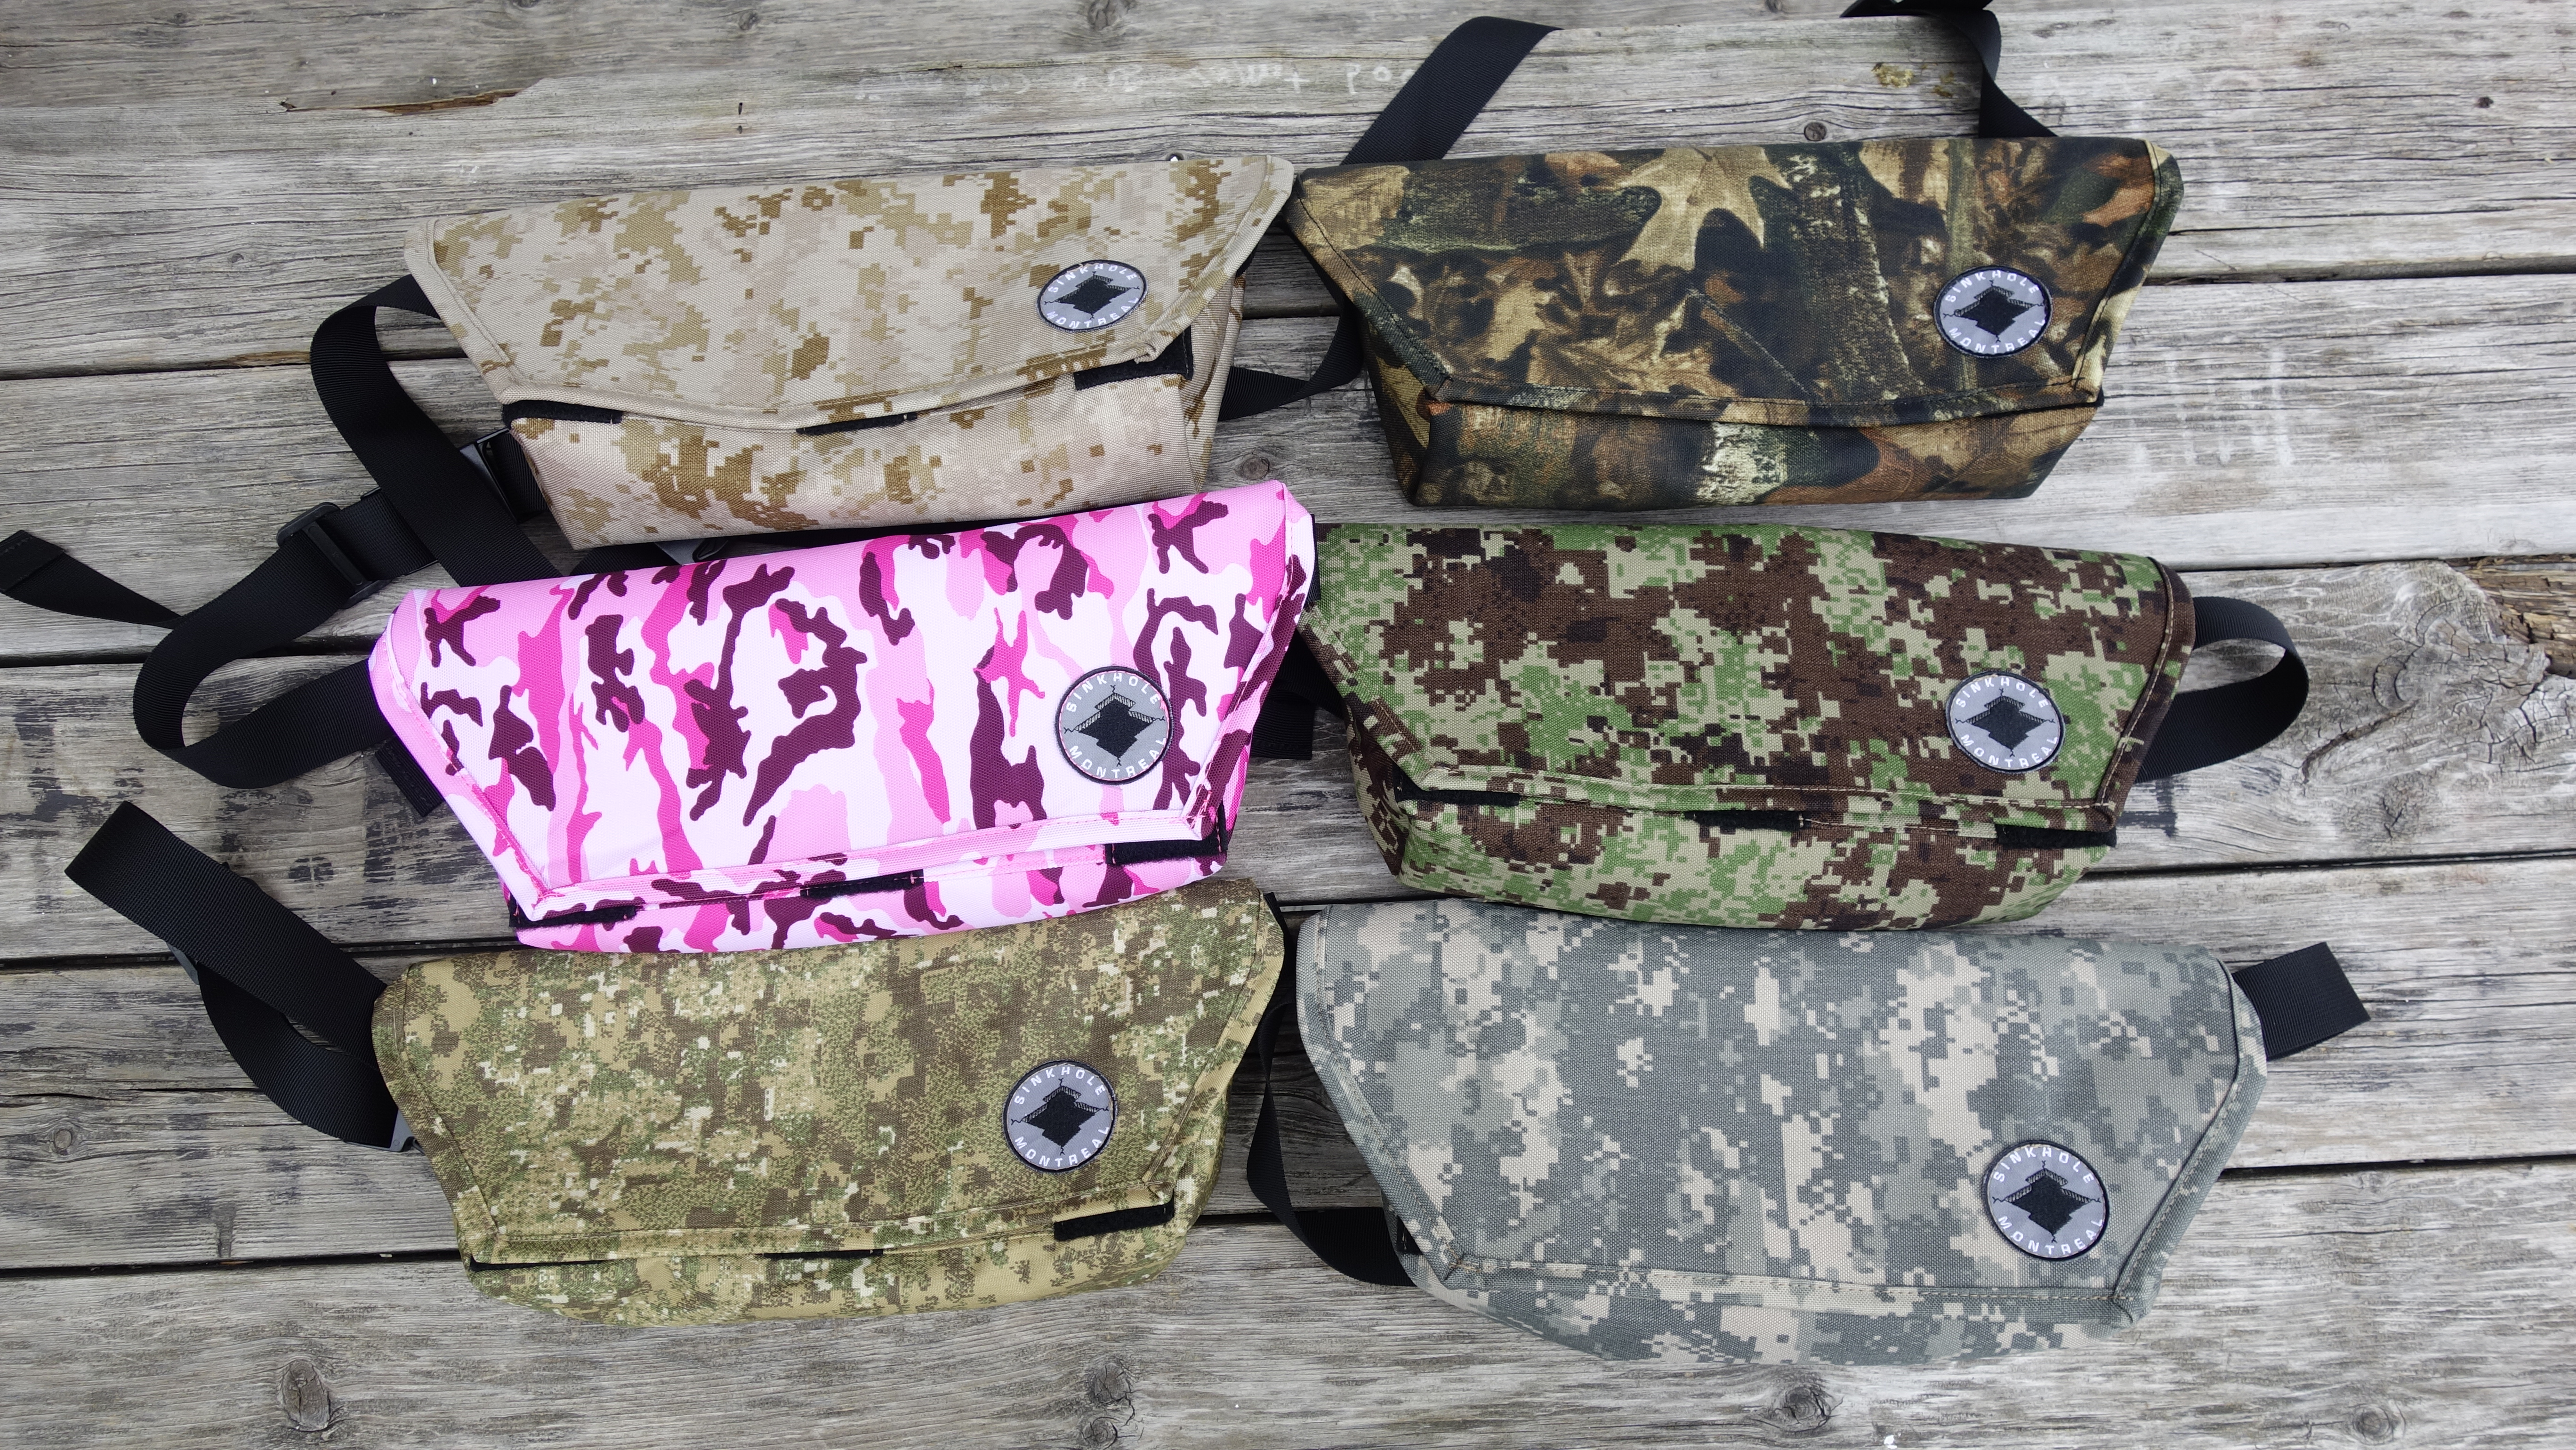 slection of mini-sling bags in different camoflauge patterns